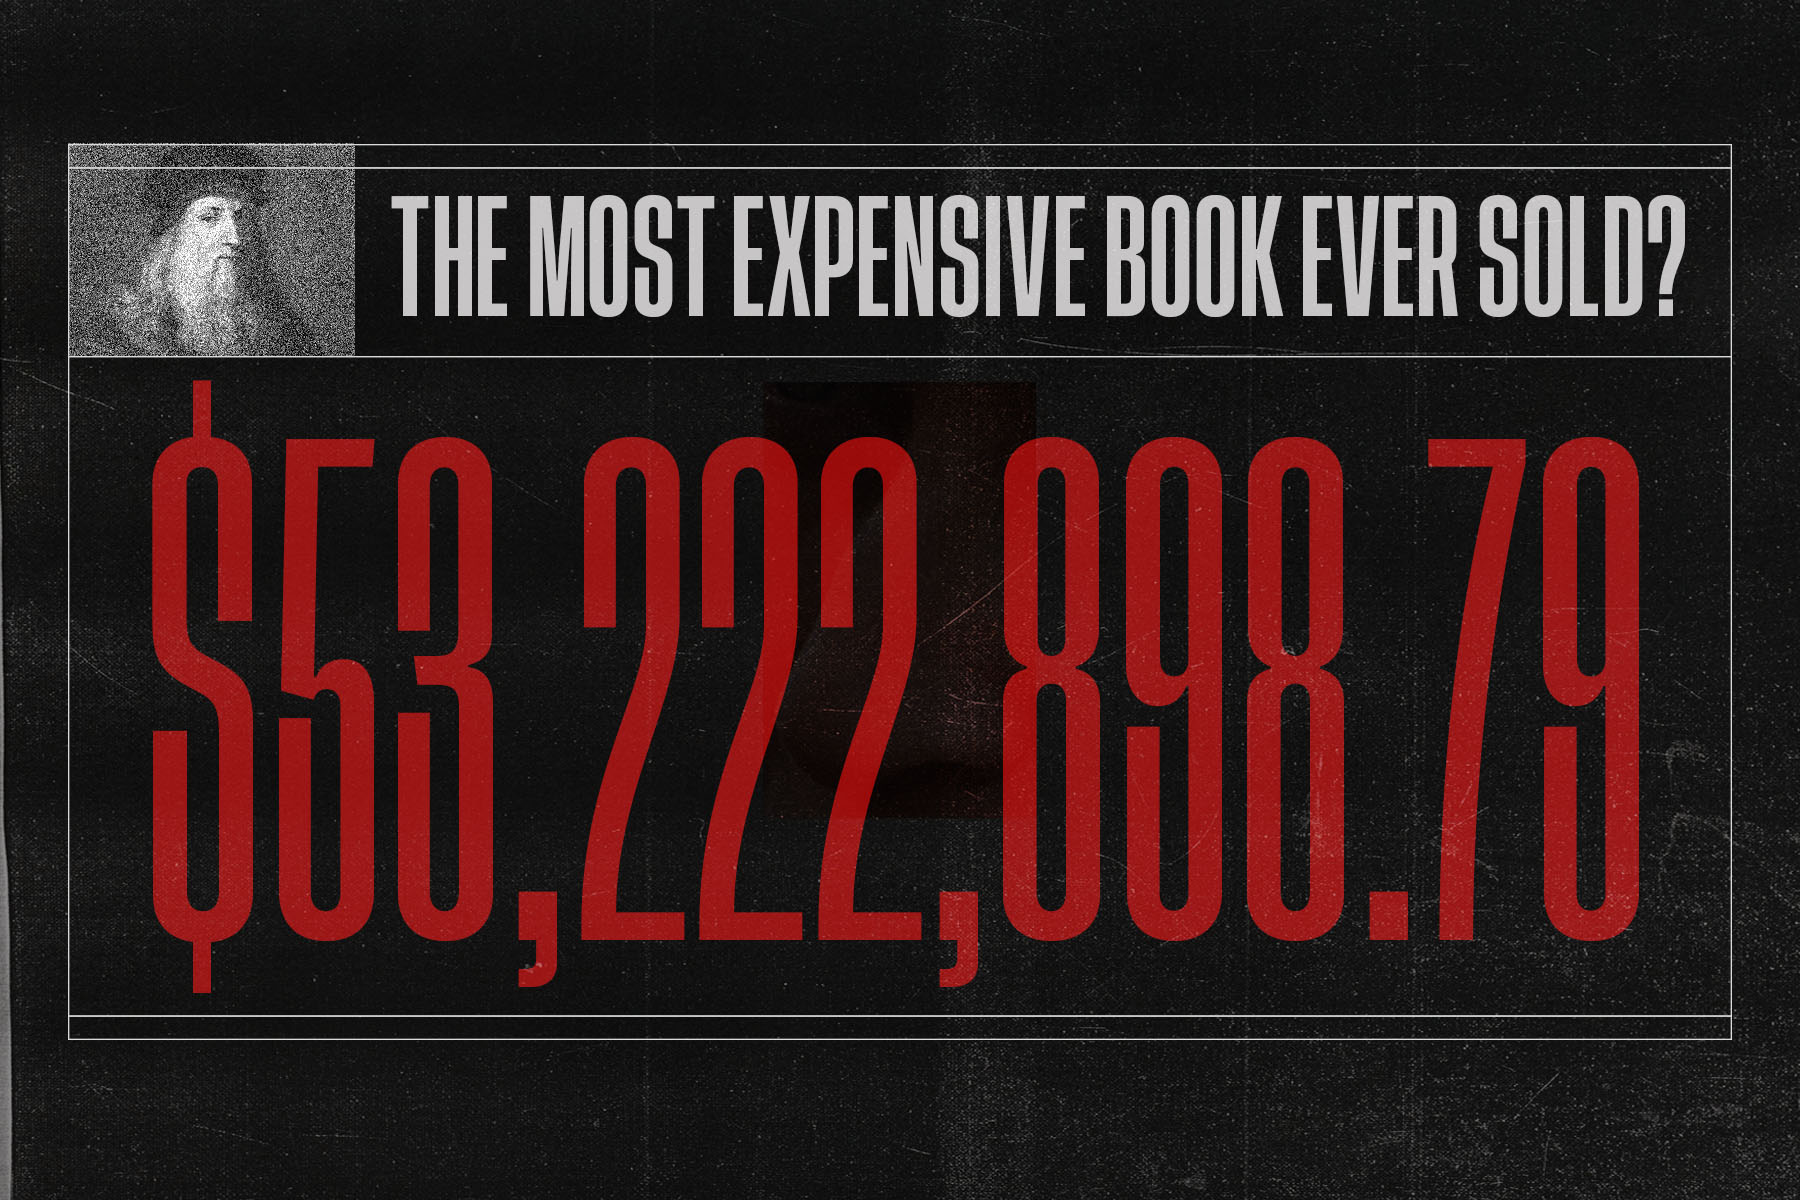 'The most expensive book ever sold?' written in white next to a picture of Leonardo da Vinci with the figure $53,222,898.79 written below in big red lettes.